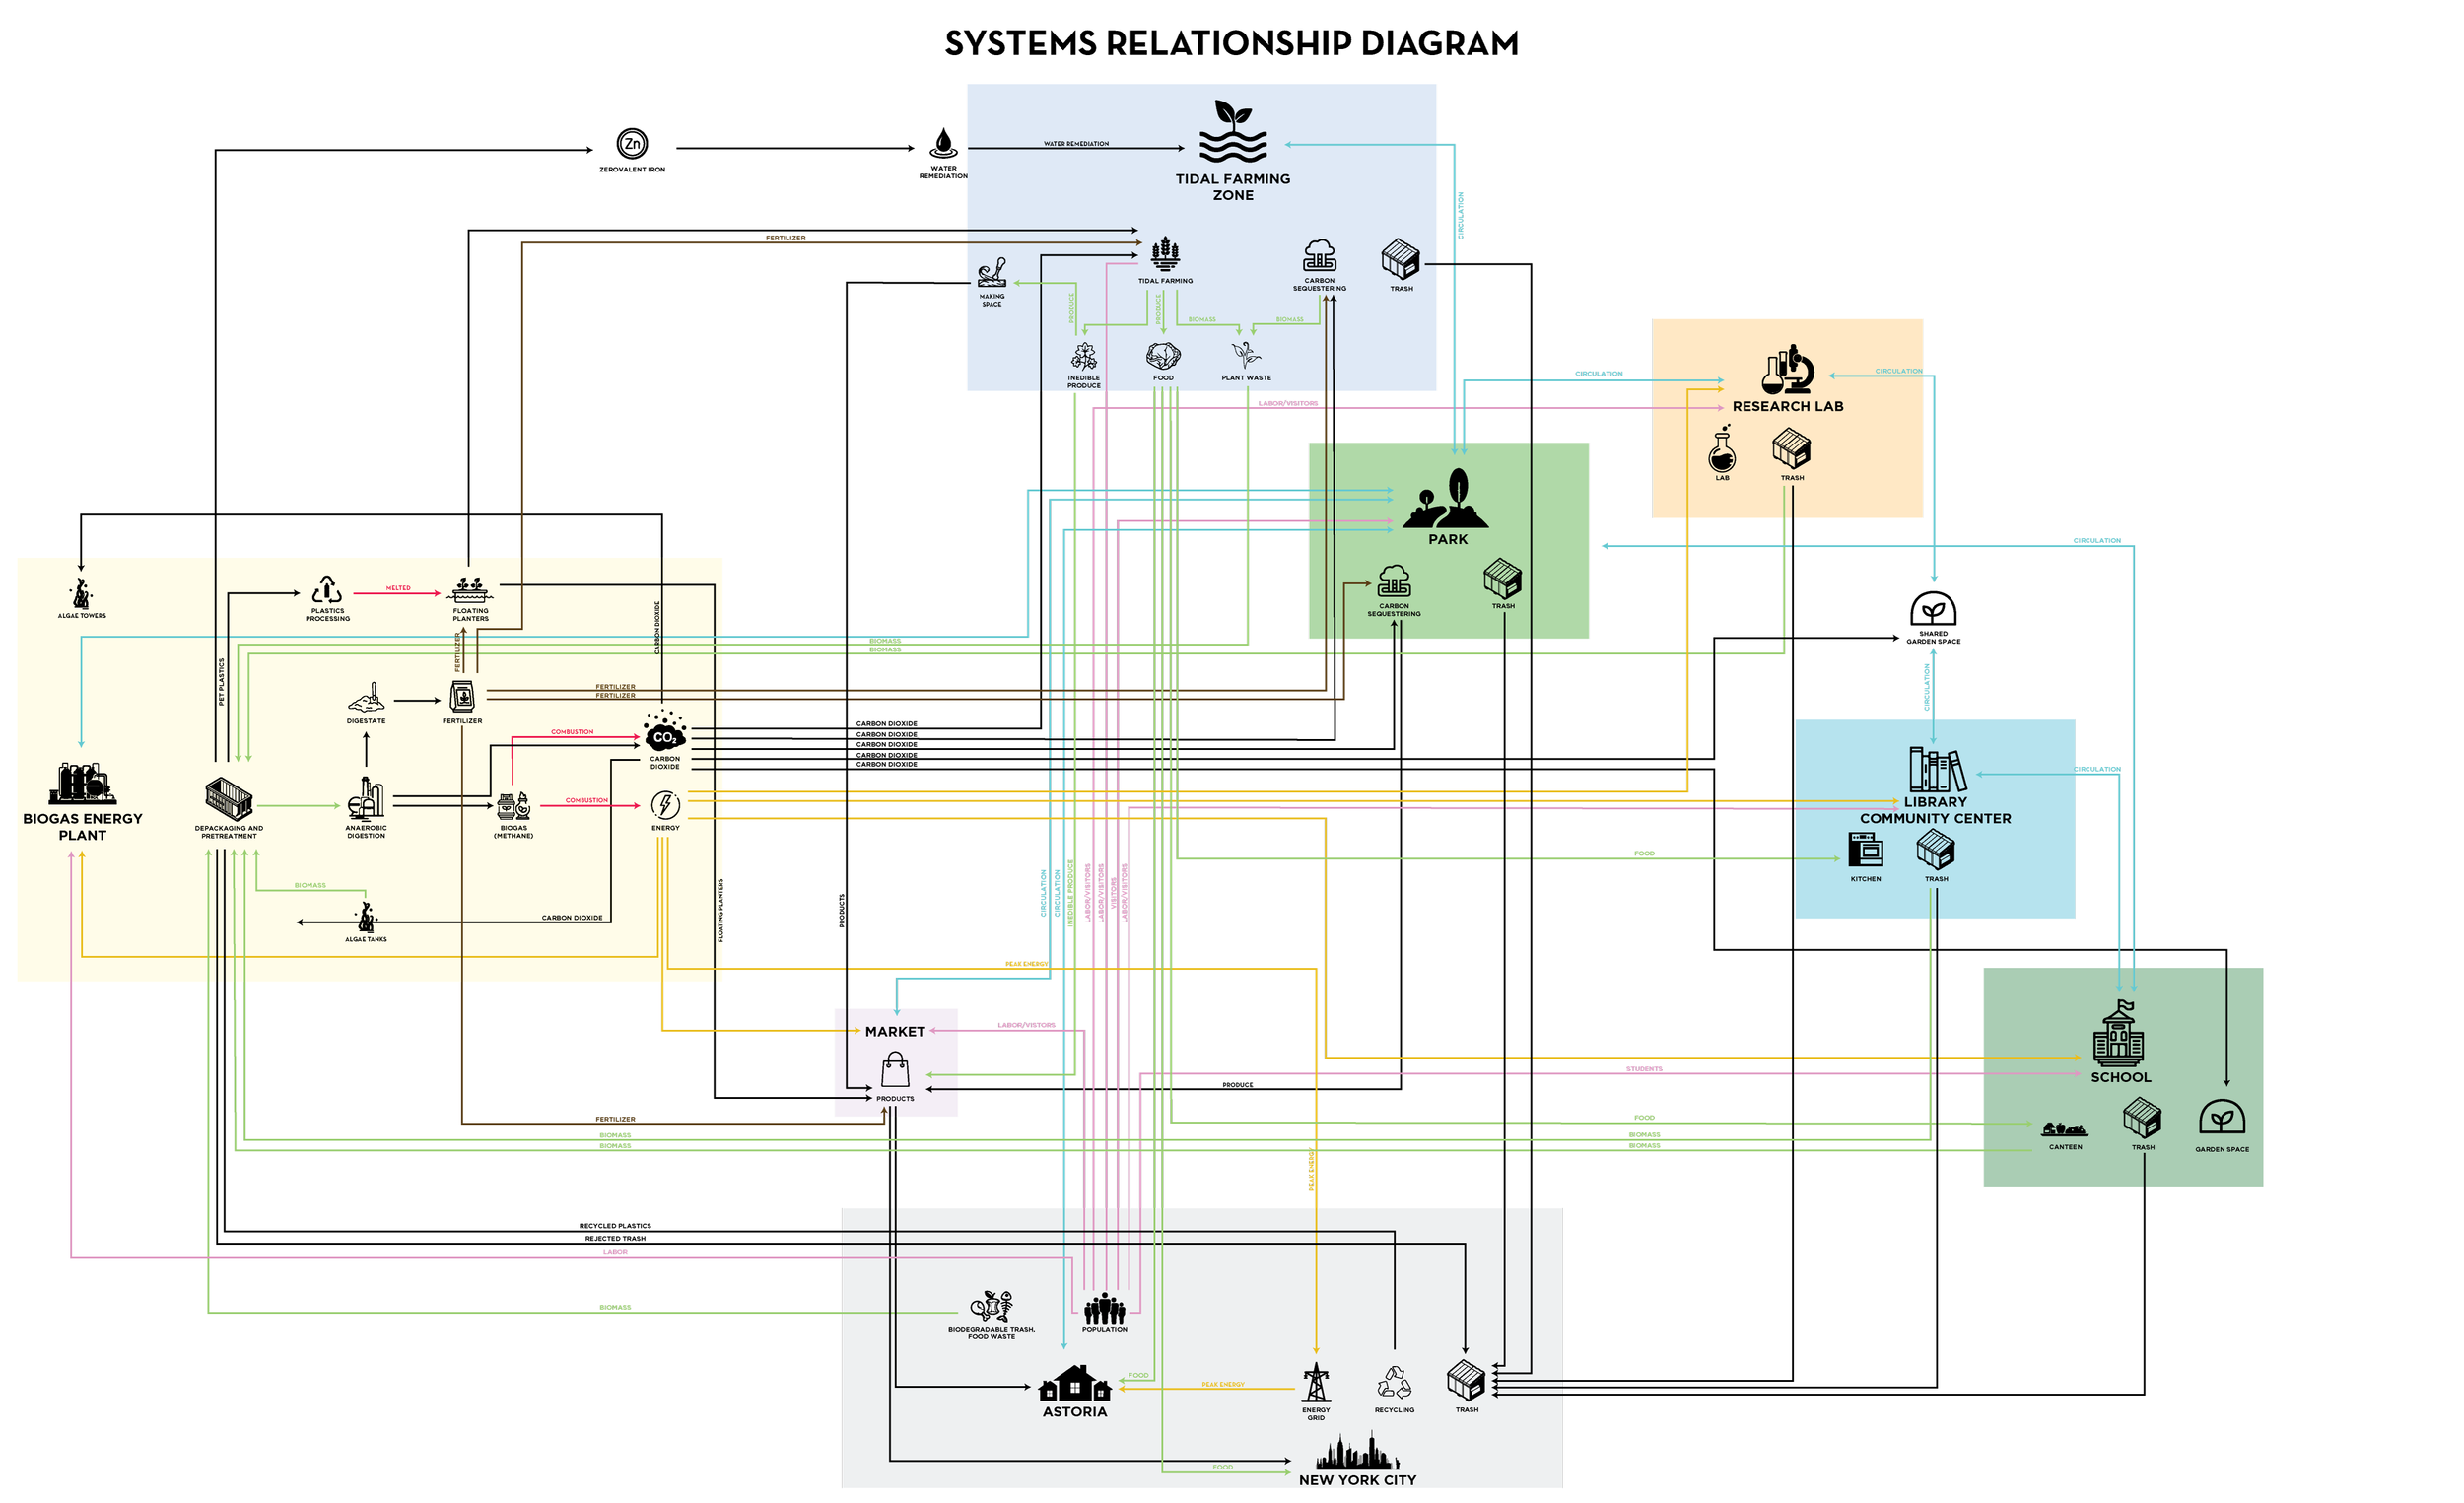 Systems-Relationship-Diagram-Programs.png